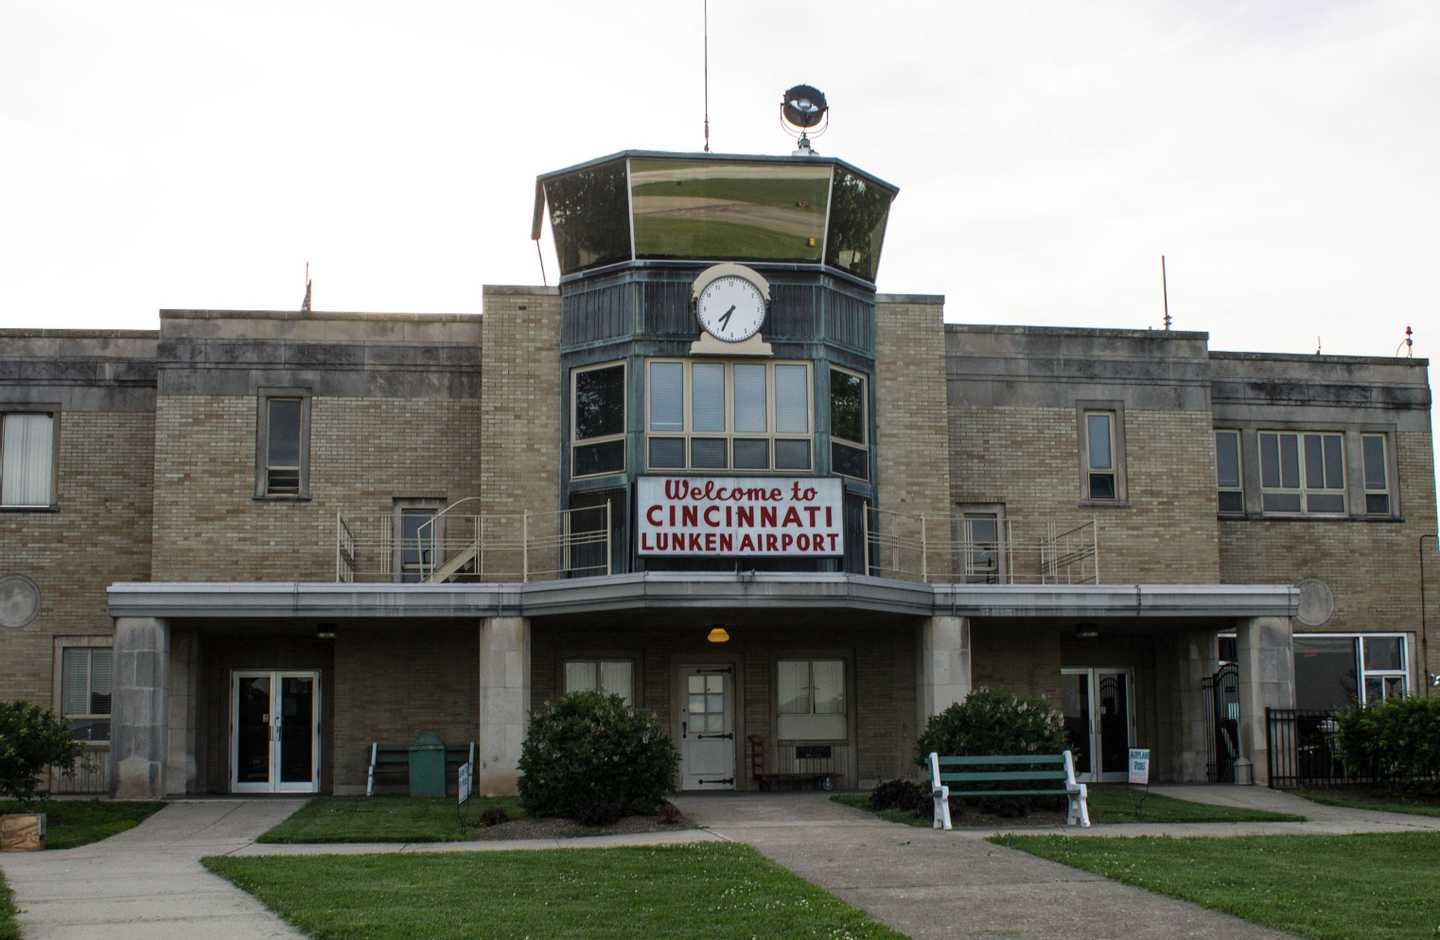 The old terminal at the Lunken Airport